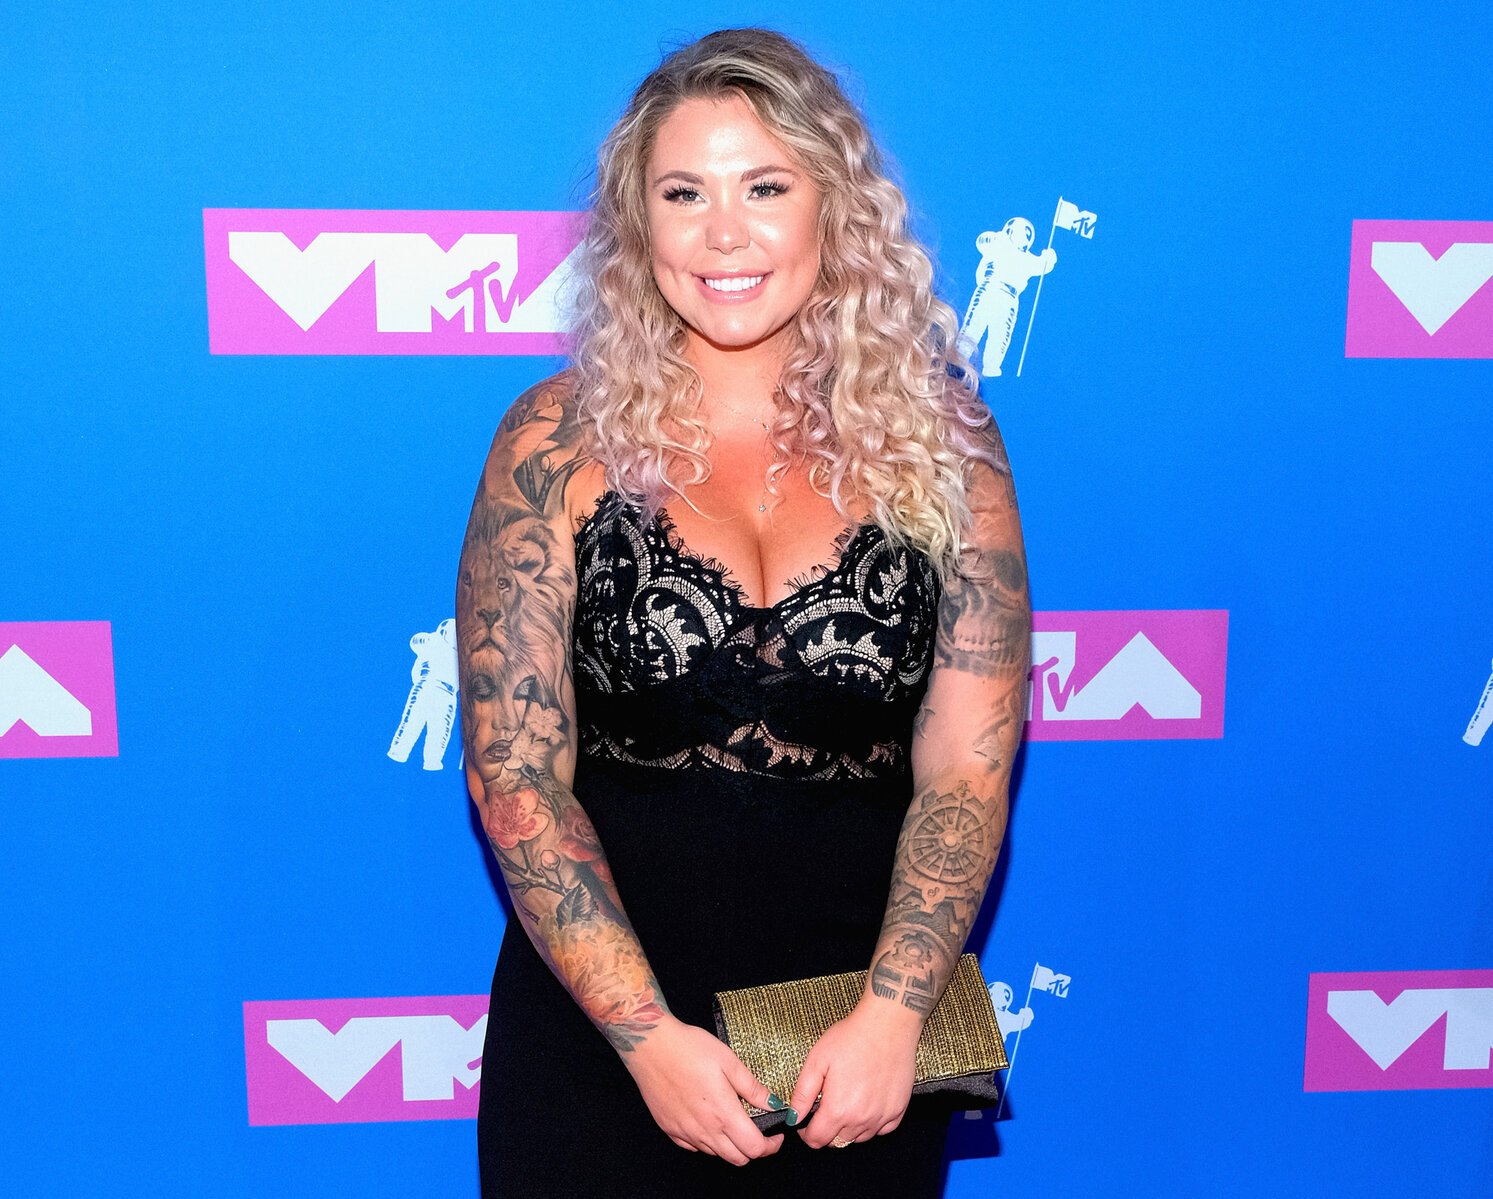 Kailyn Lowry at the 2018 MTV Video Music Awards